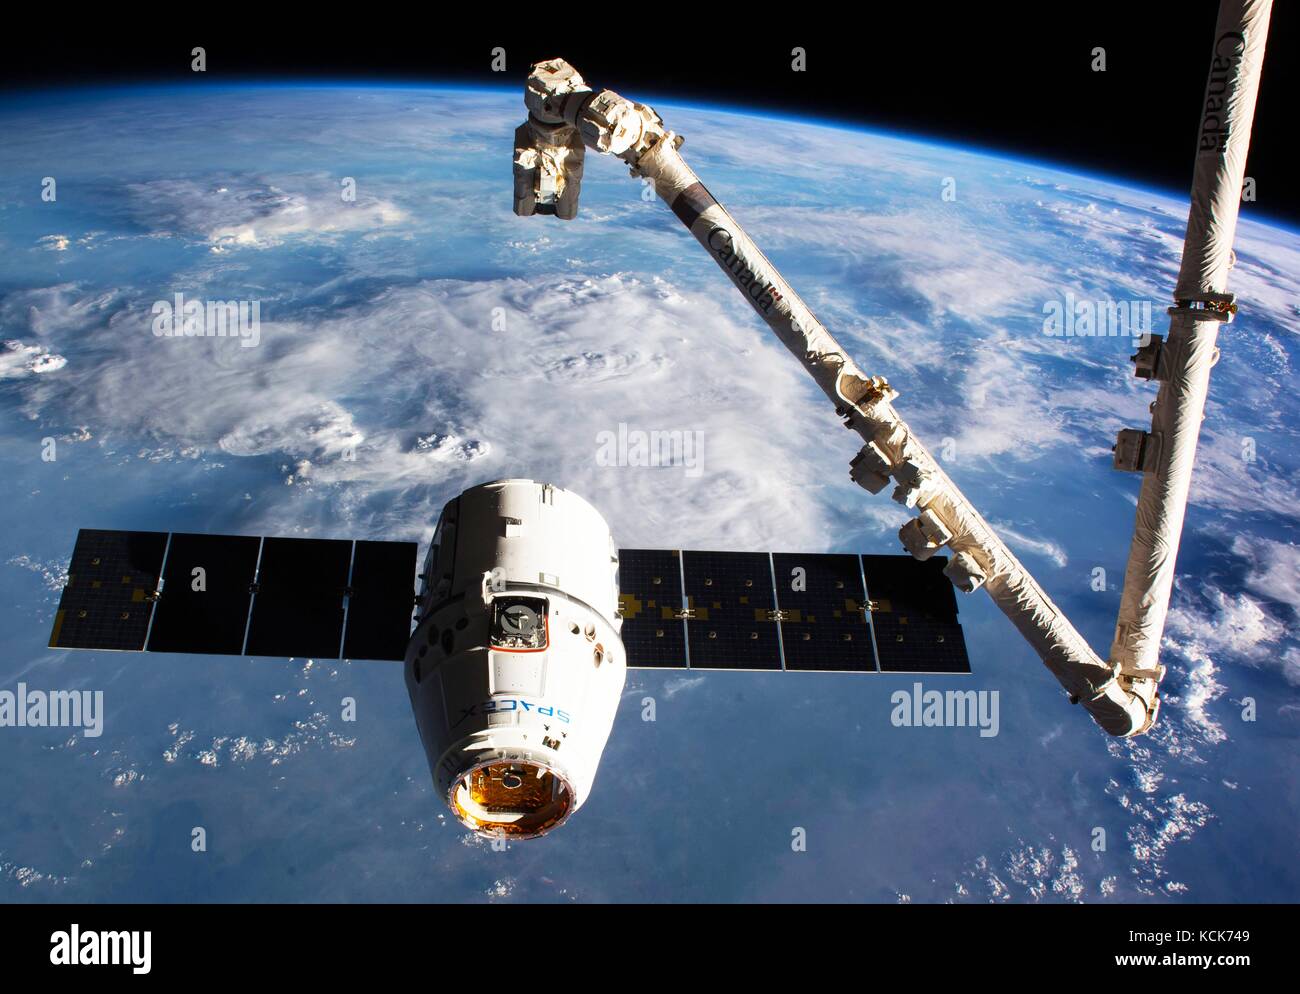 The NASA International Space Station Canadarm2 robotic arm prepares to grab the SpaceX CRS-10 Dragon cargo spacecraft as it approaches the ISS February 23, 2017 in Earth orbit.  (photo by NASA Photo  via Planetpix) Stock Photo